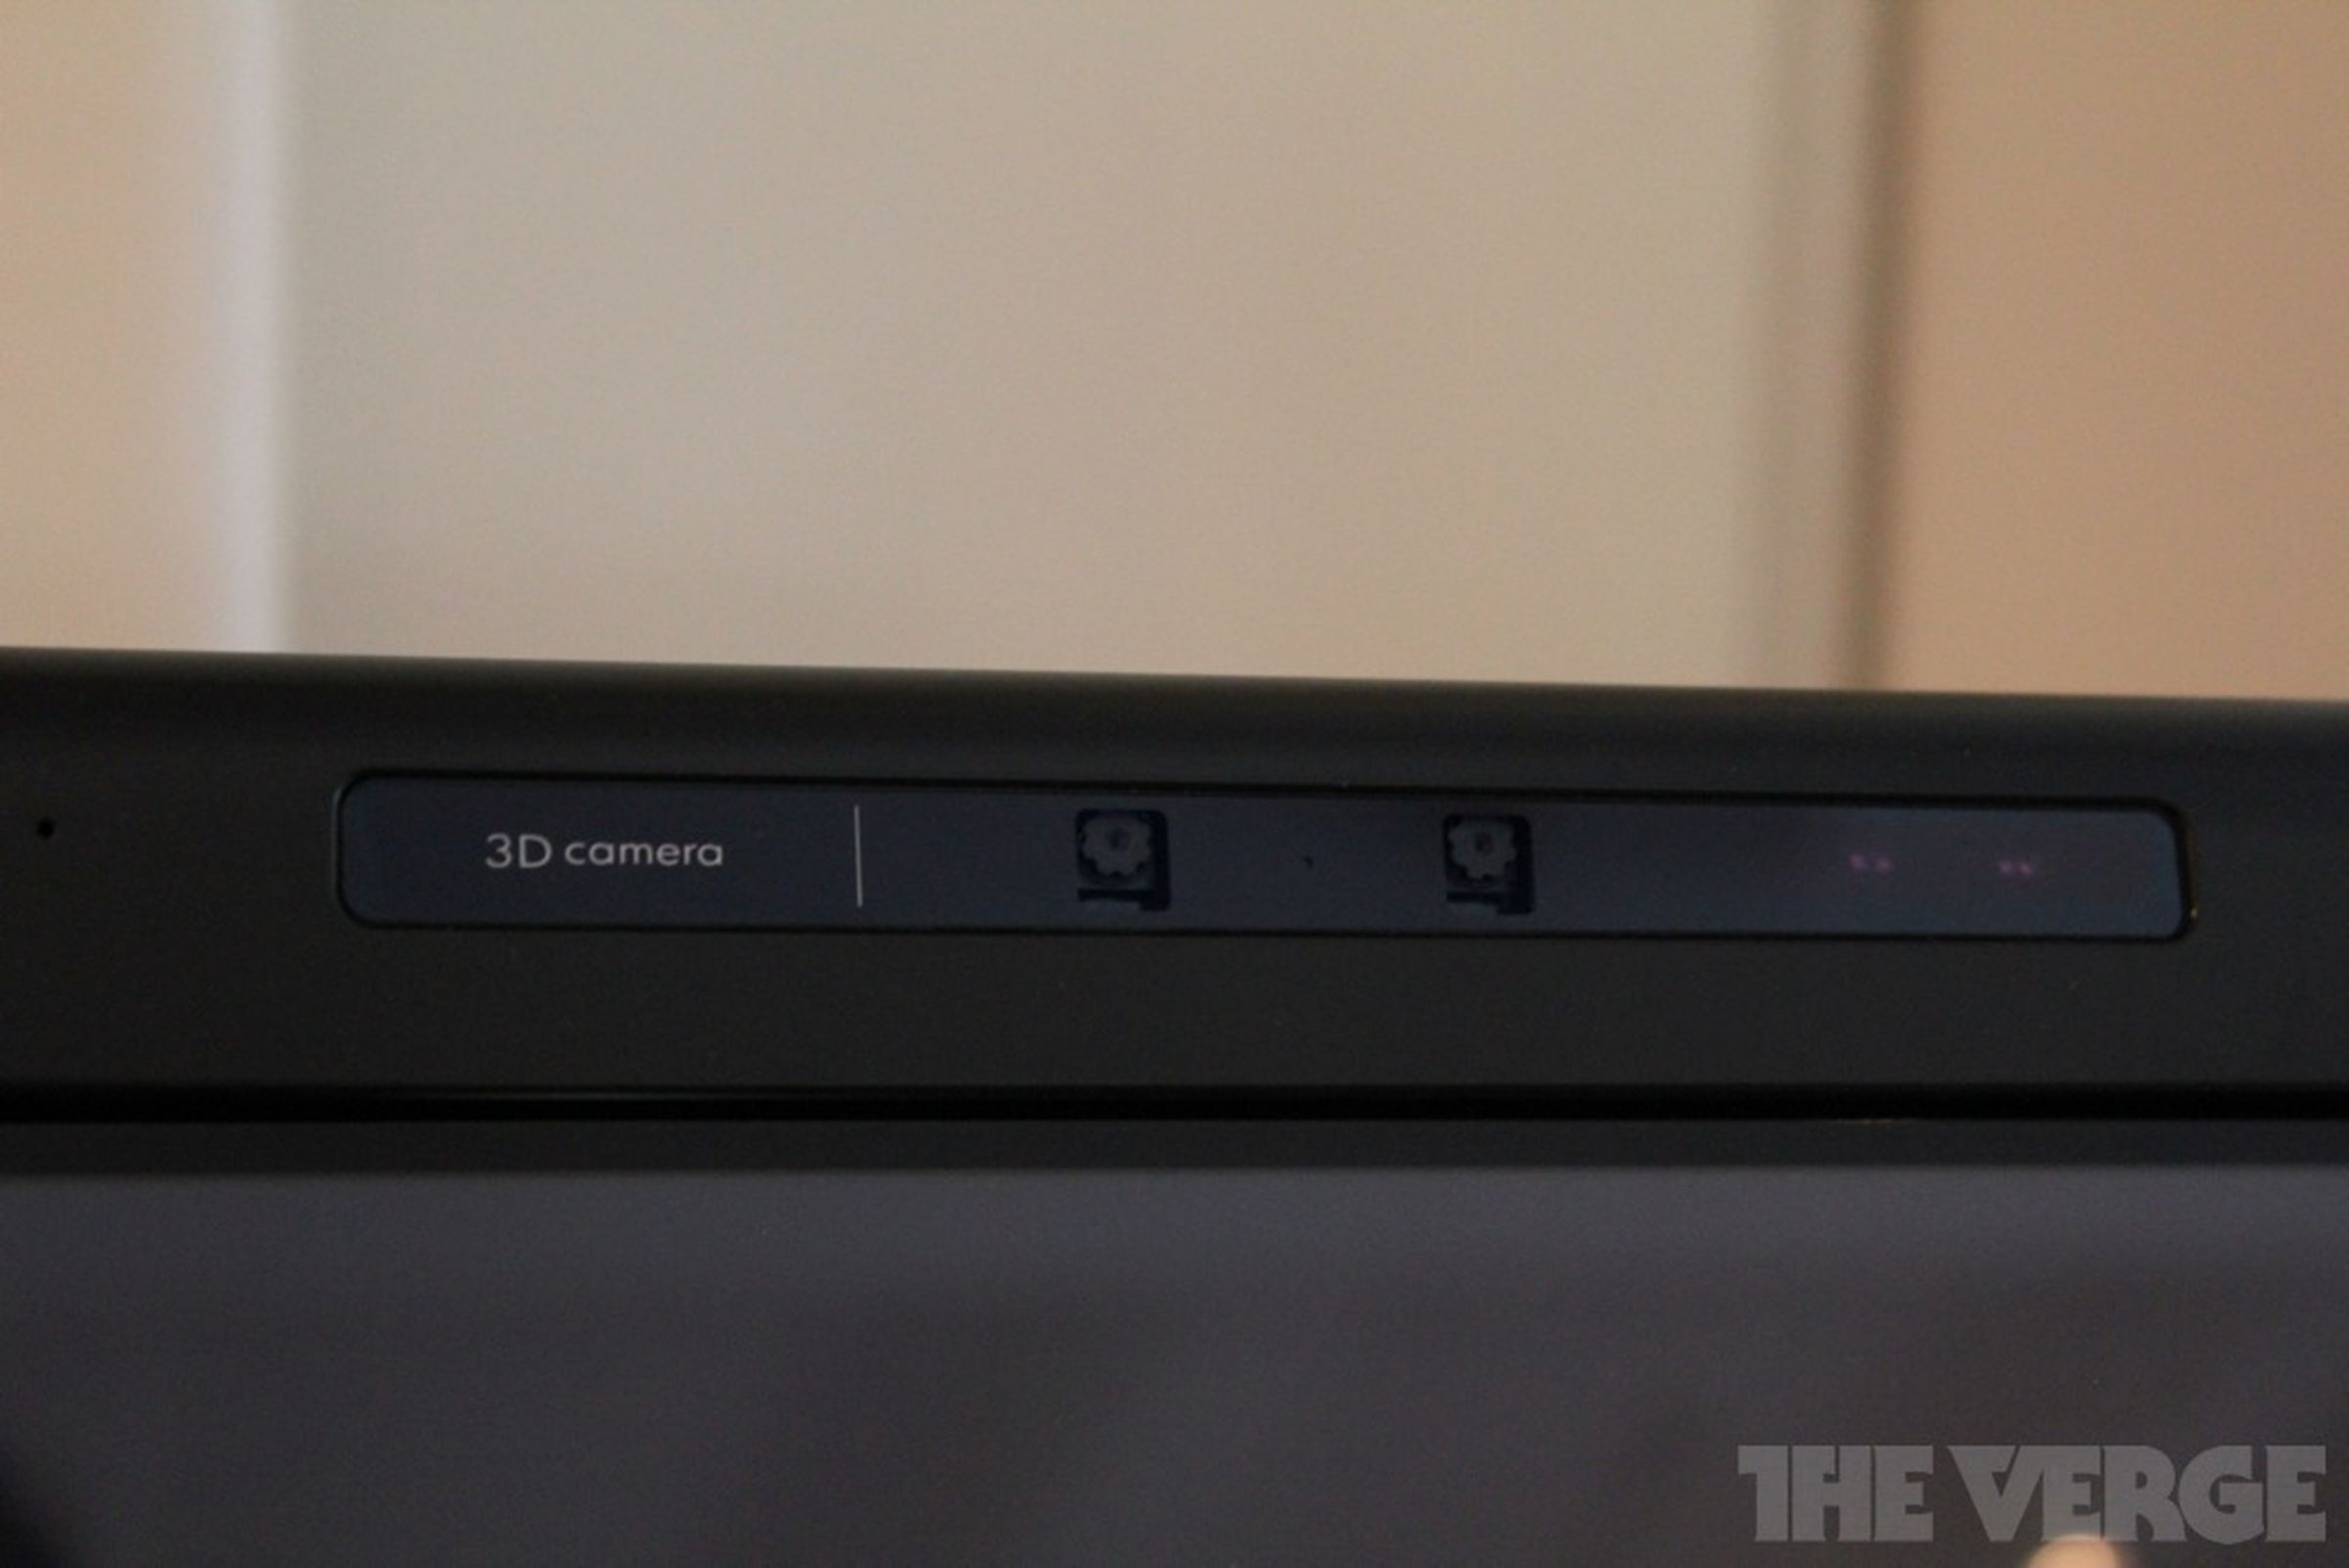 HP TouchSmart 620 3D and HP 2311gt 3D monitor hands-on photos